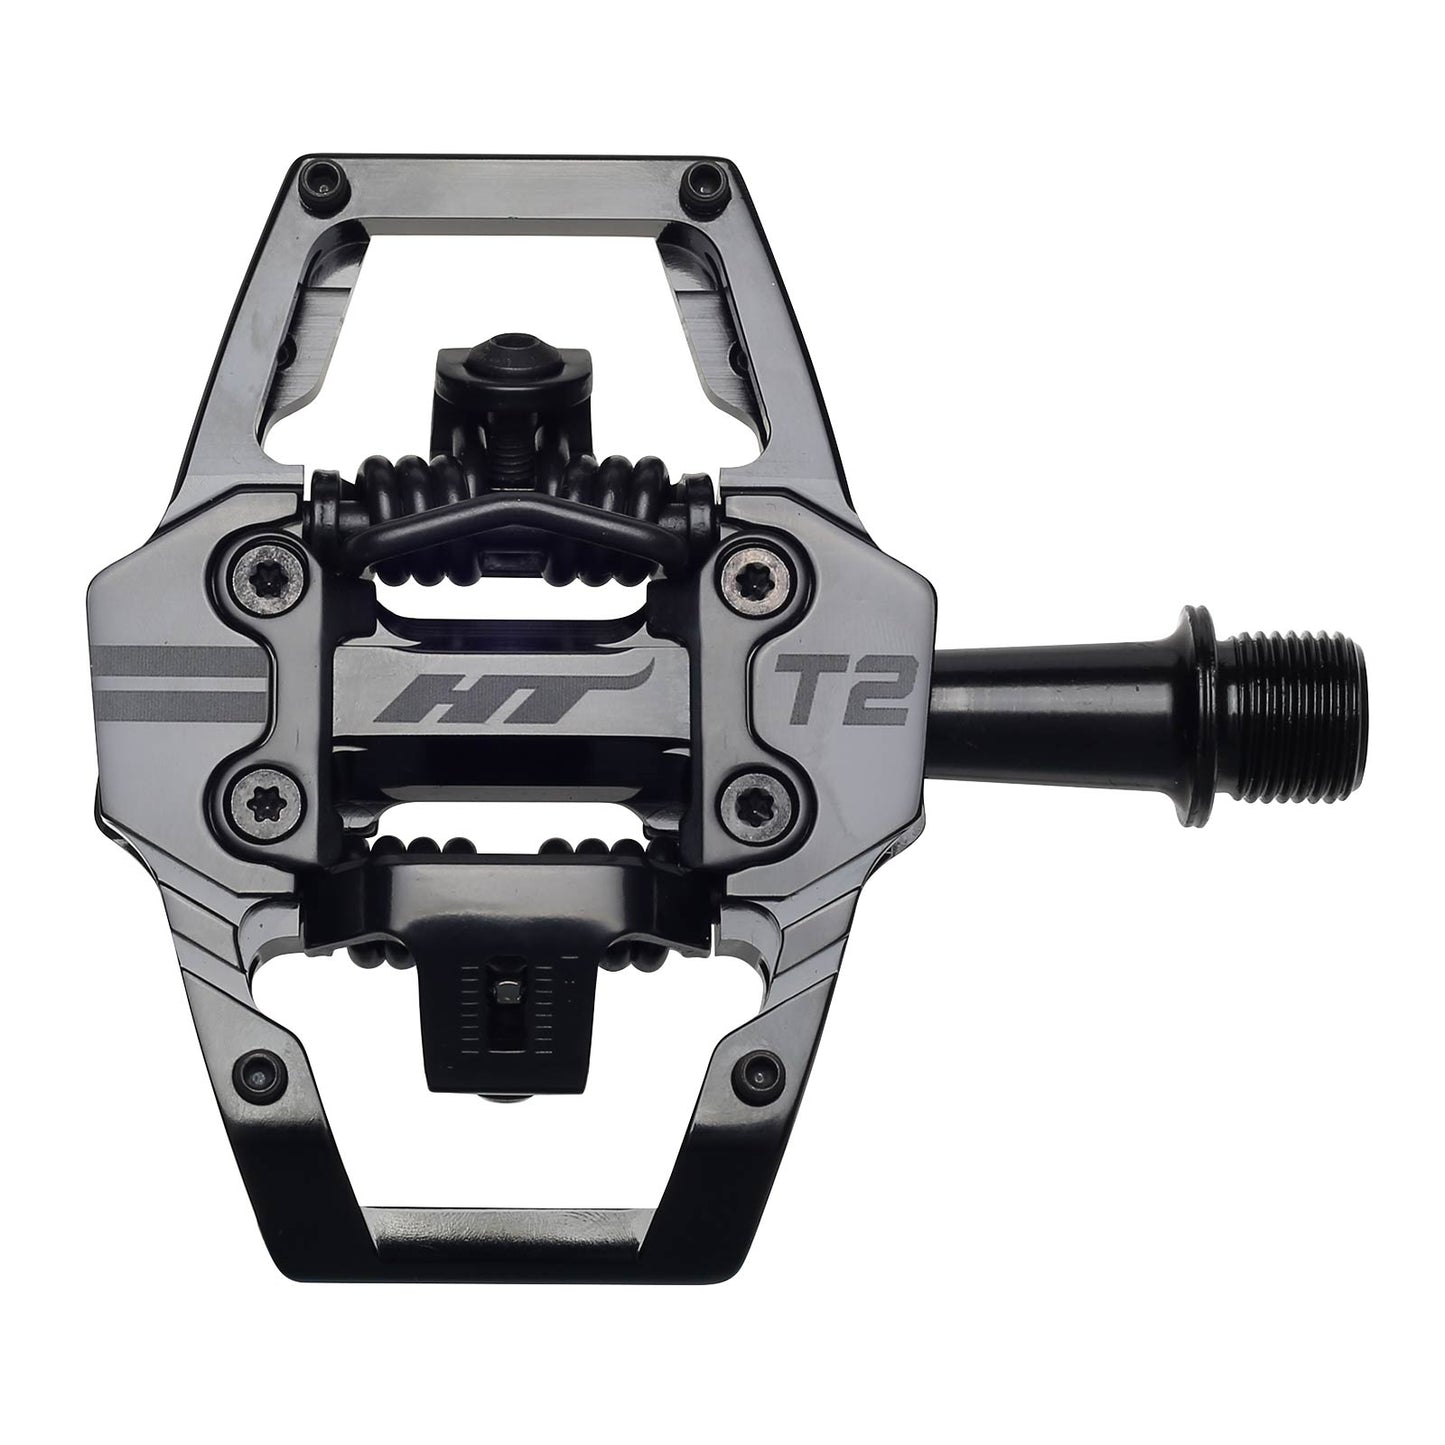 Ht T2 Pedals Alloy / CNC CRMO - Stealth Black